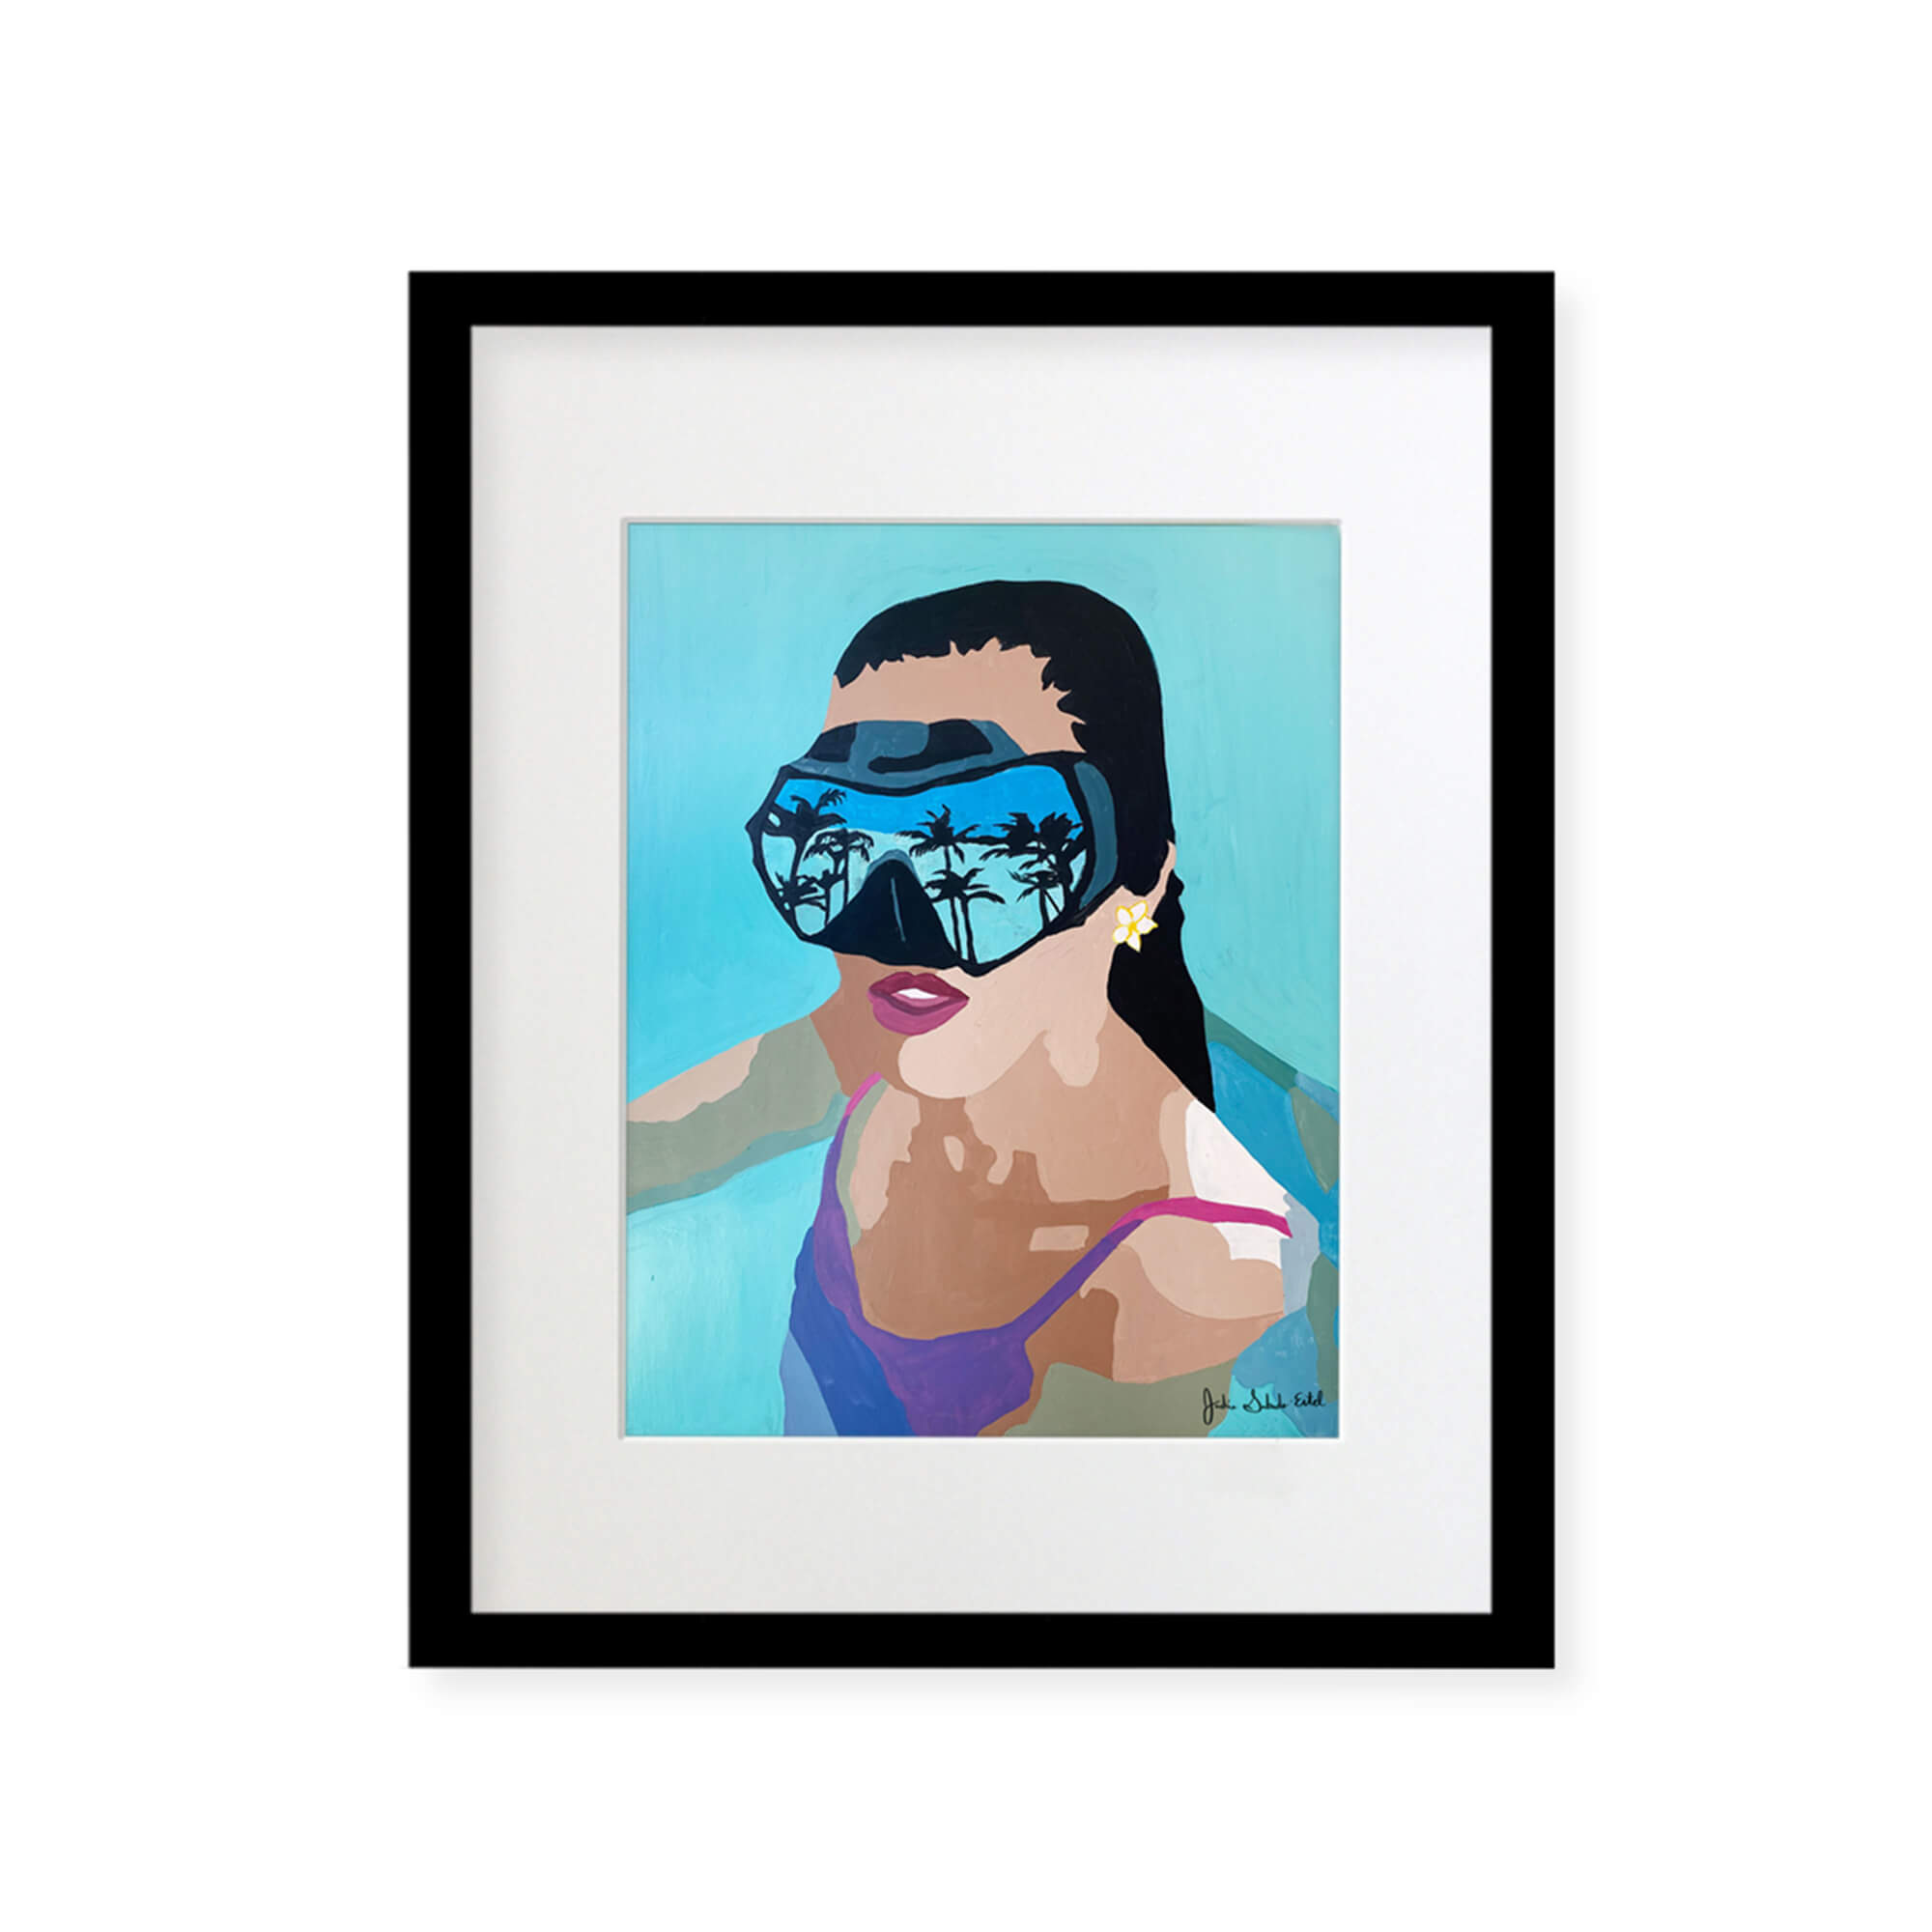 A framed matted art print featuring a portrait of a woman wearing goggles reflecting the tropical trees by Hawaii artist Jackie Eitel